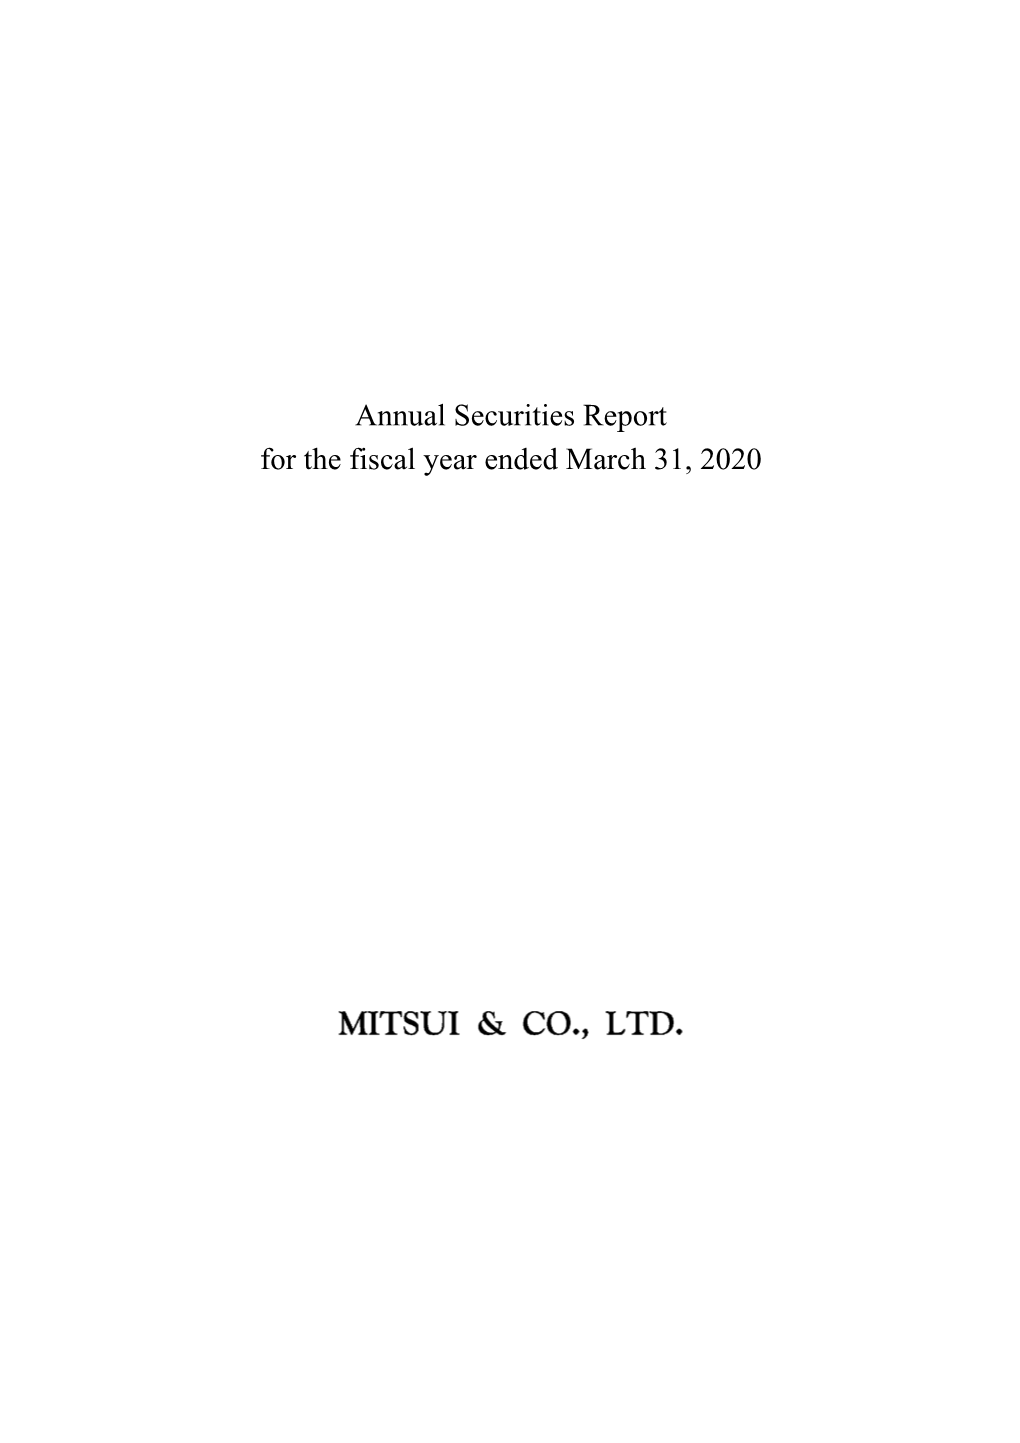 Annual Securities Report for the Fiscal Year Ended March 31, 2020 Certain References and Information